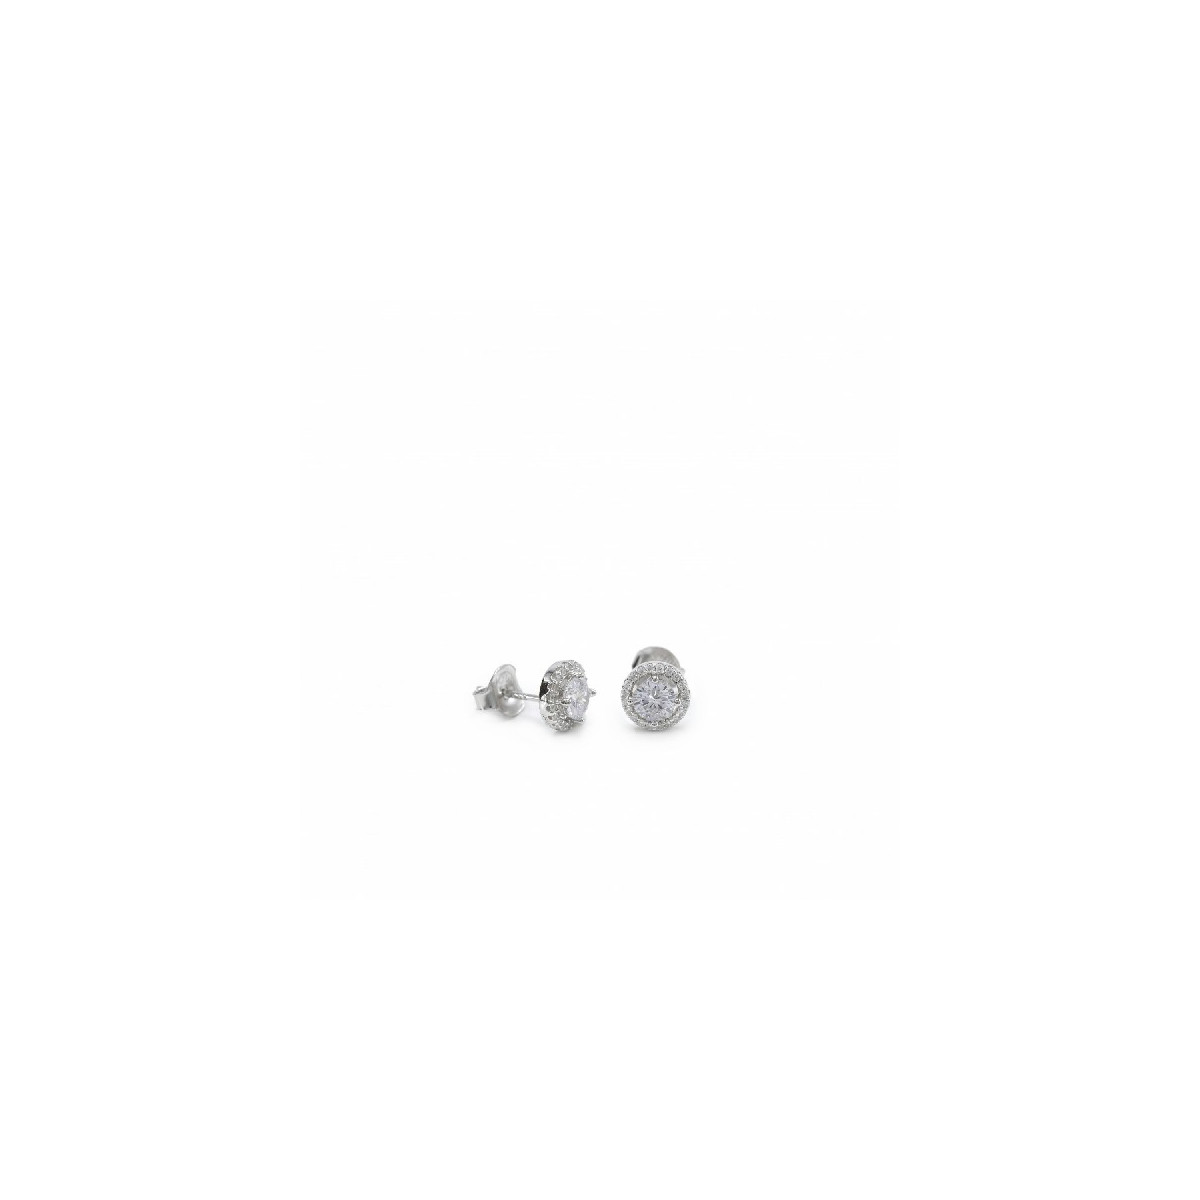 CREEPERS LINEARGENT EARRINGS - 17966-A